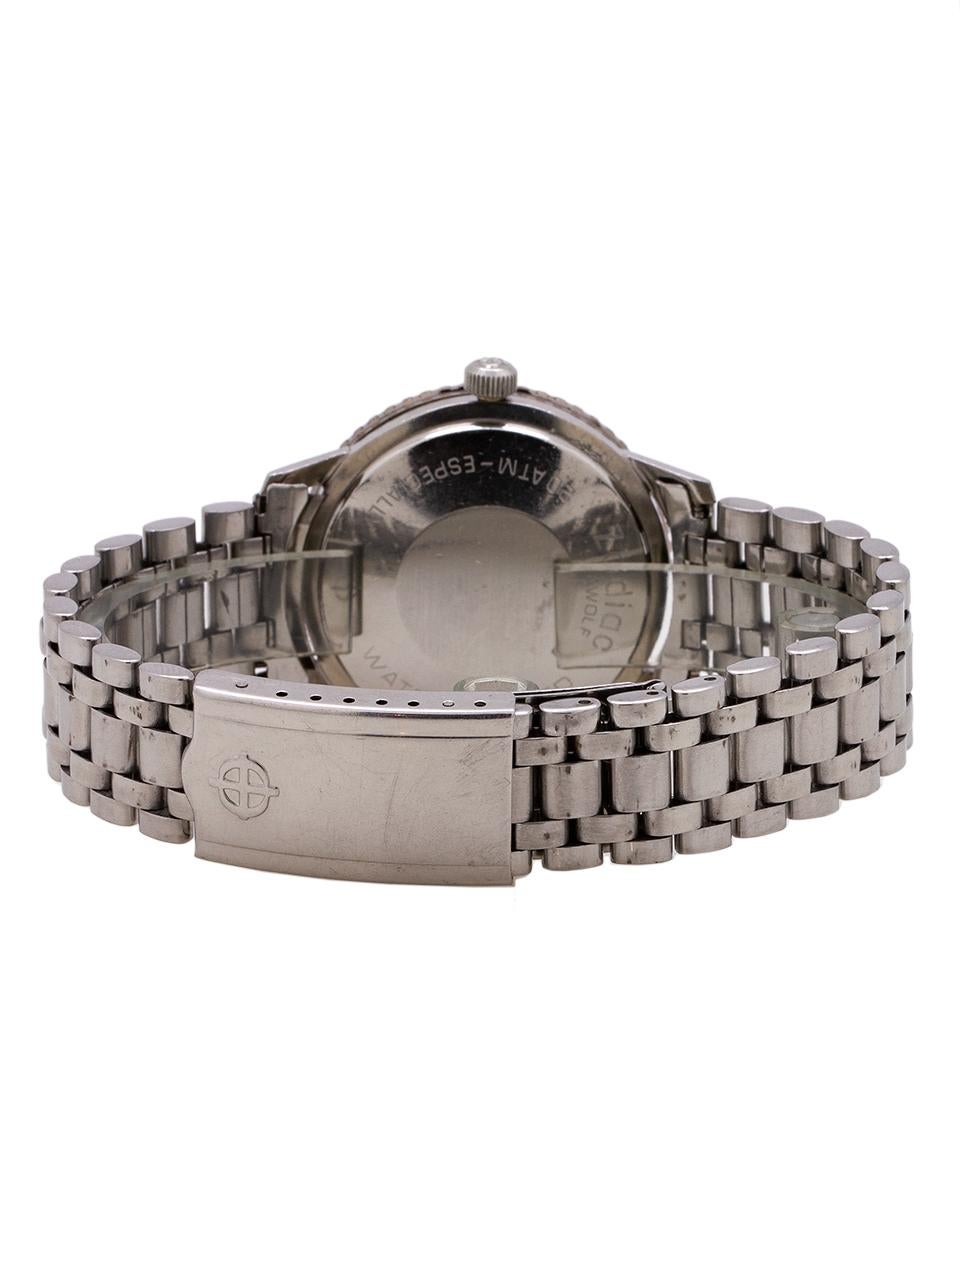 Zodiac Seawolf JB Champion Bracelet Stainless Steel, circa 1960s In Excellent Condition For Sale In West Hollywood, CA